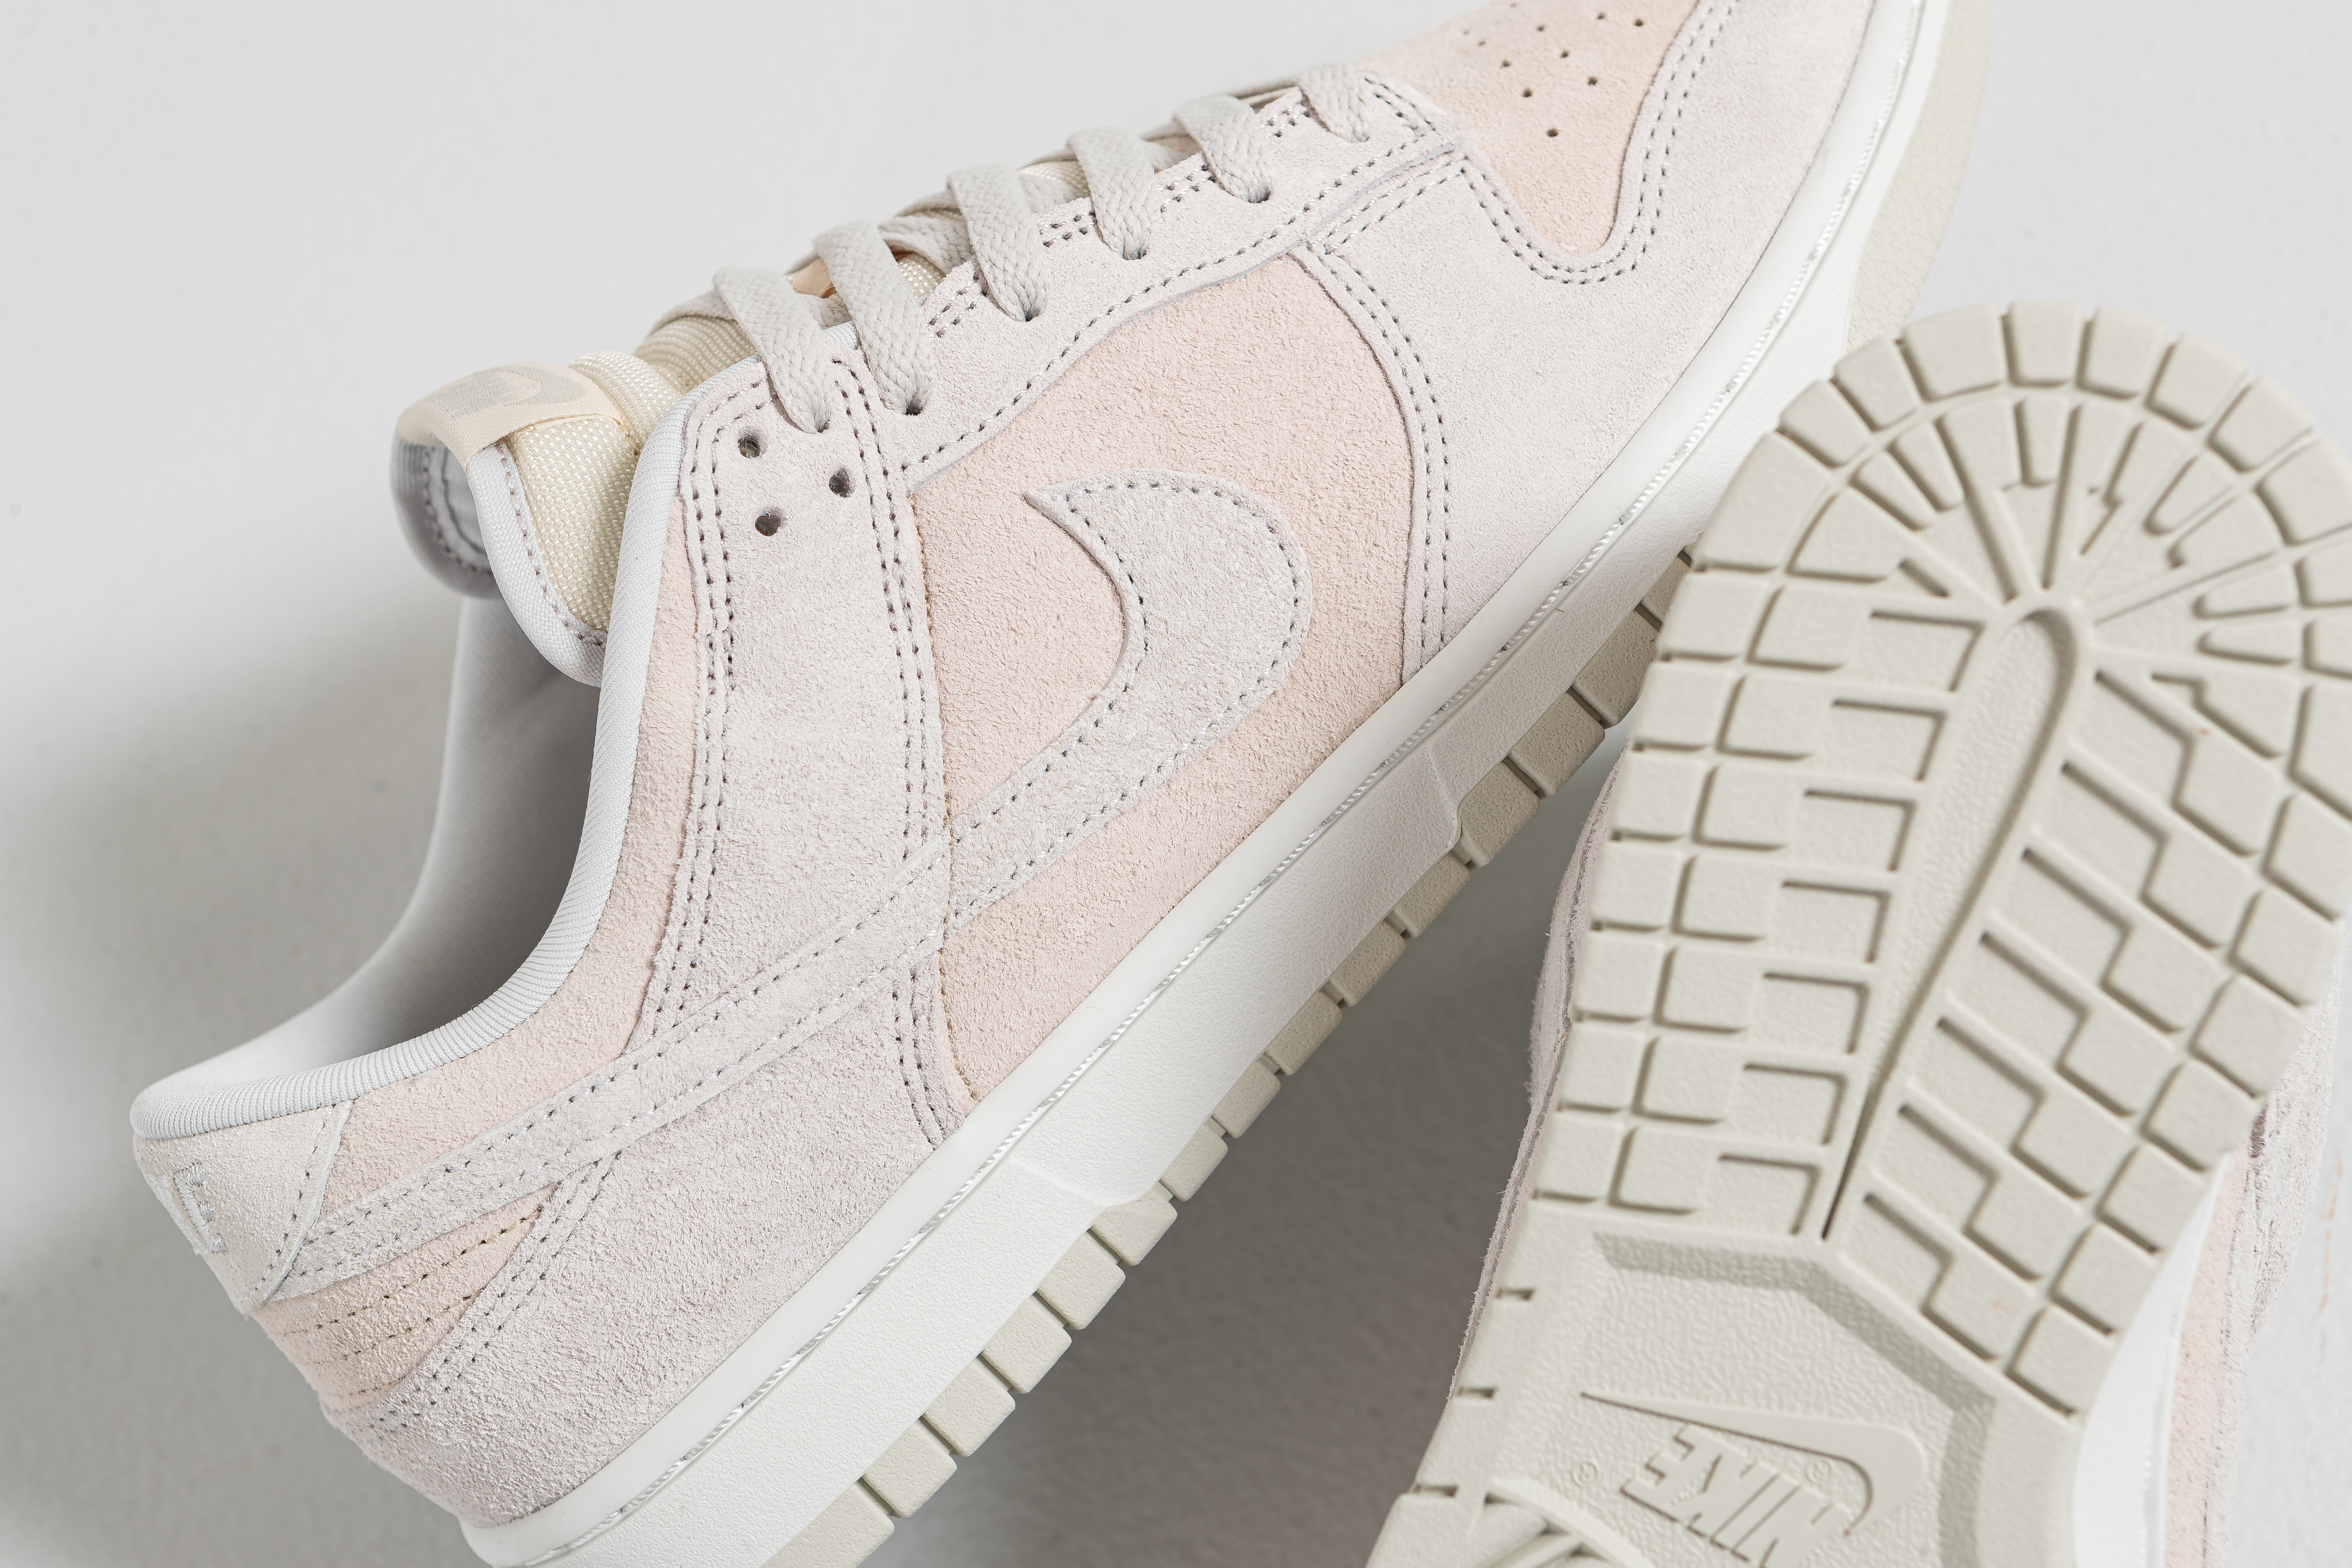 Nike - Dunk Low Retro PRM - Vast Grey/Summit White-Pearl White - Up There